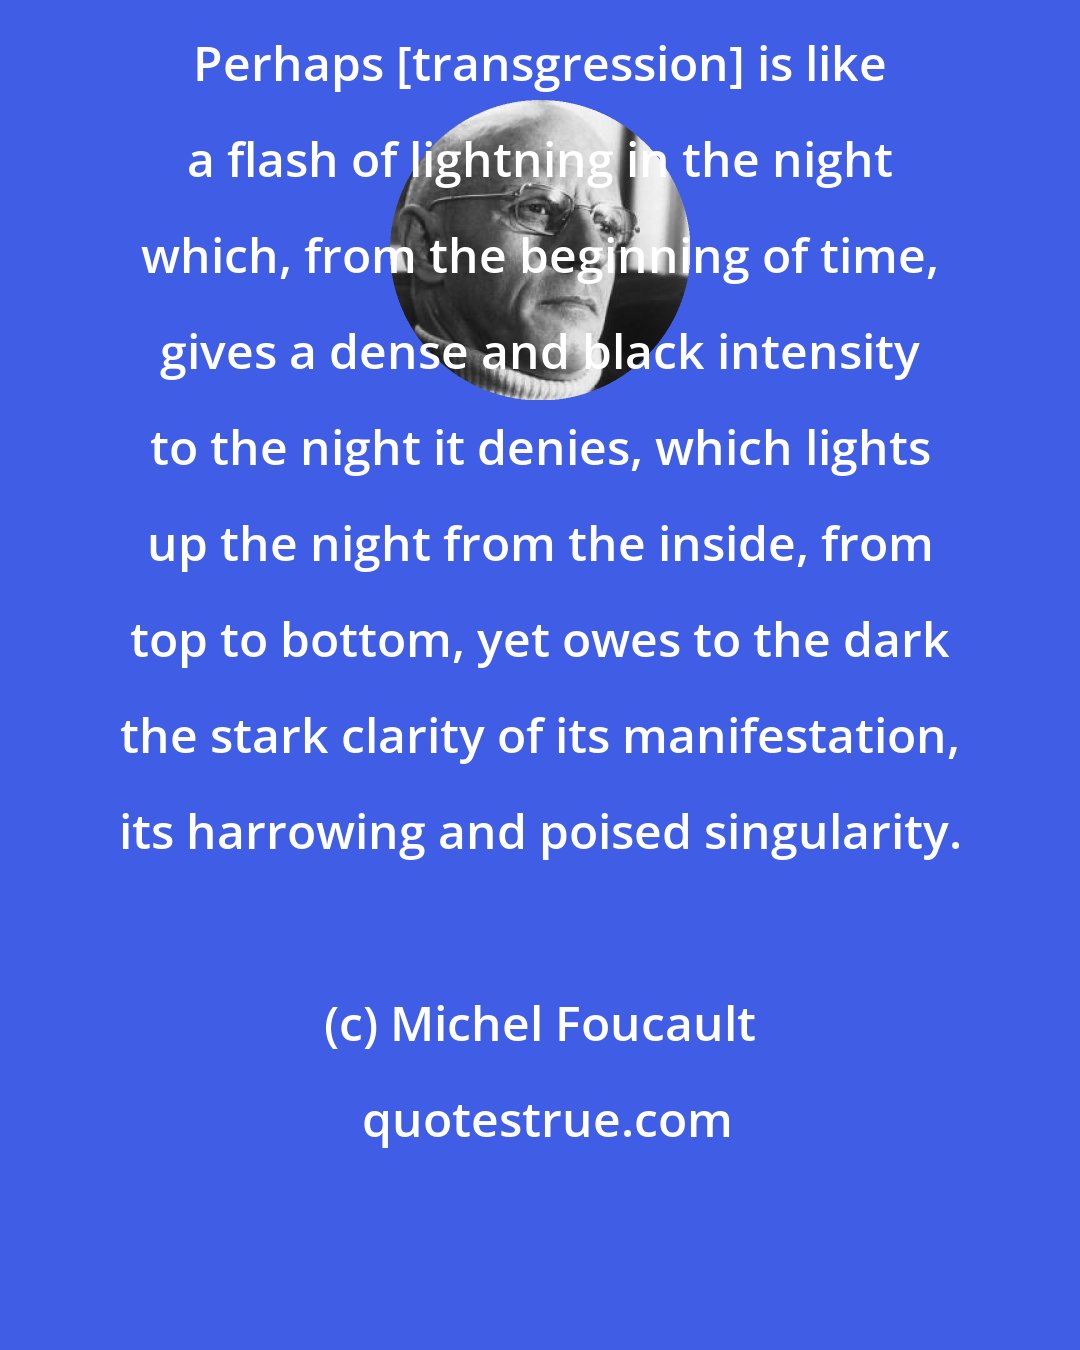 Michel Foucault: Perhaps [transgression] is like a flash of lightning in the night which, from the beginning of time, gives a dense and black intensity to the night it denies, which lights up the night from the inside, from top to bottom, yet owes to the dark the stark clarity of its manifestation, its harrowing and poised singularity.